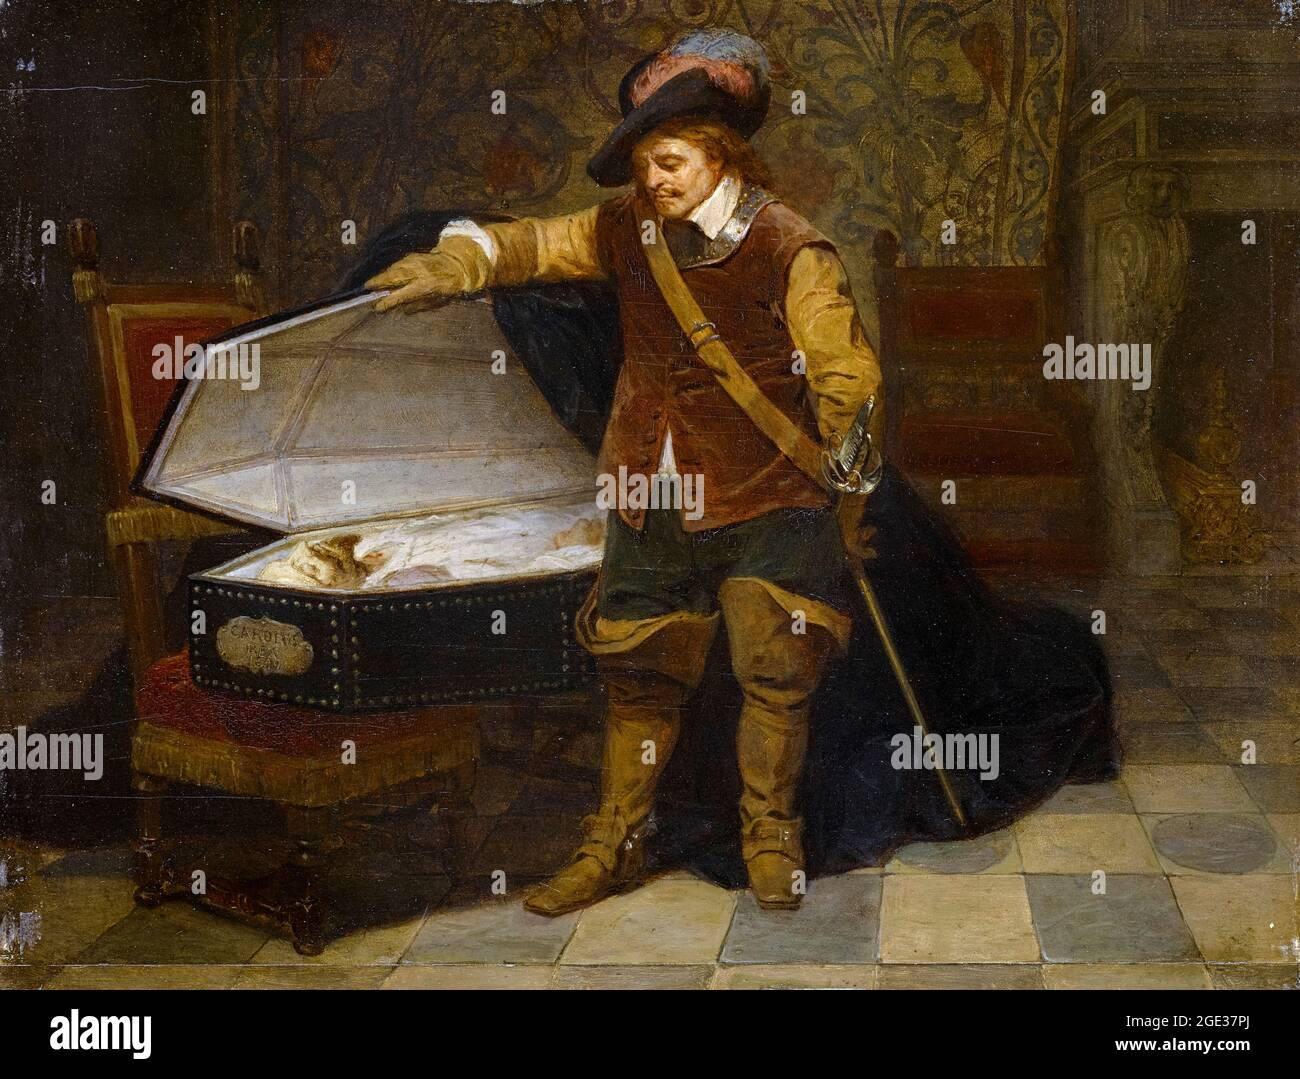 Oliver Cromwell (1599–1658), standing at the coffin of former King Charles I of England (1600–1649), painting by Paul Delaroche, after 1831 Stock Photo